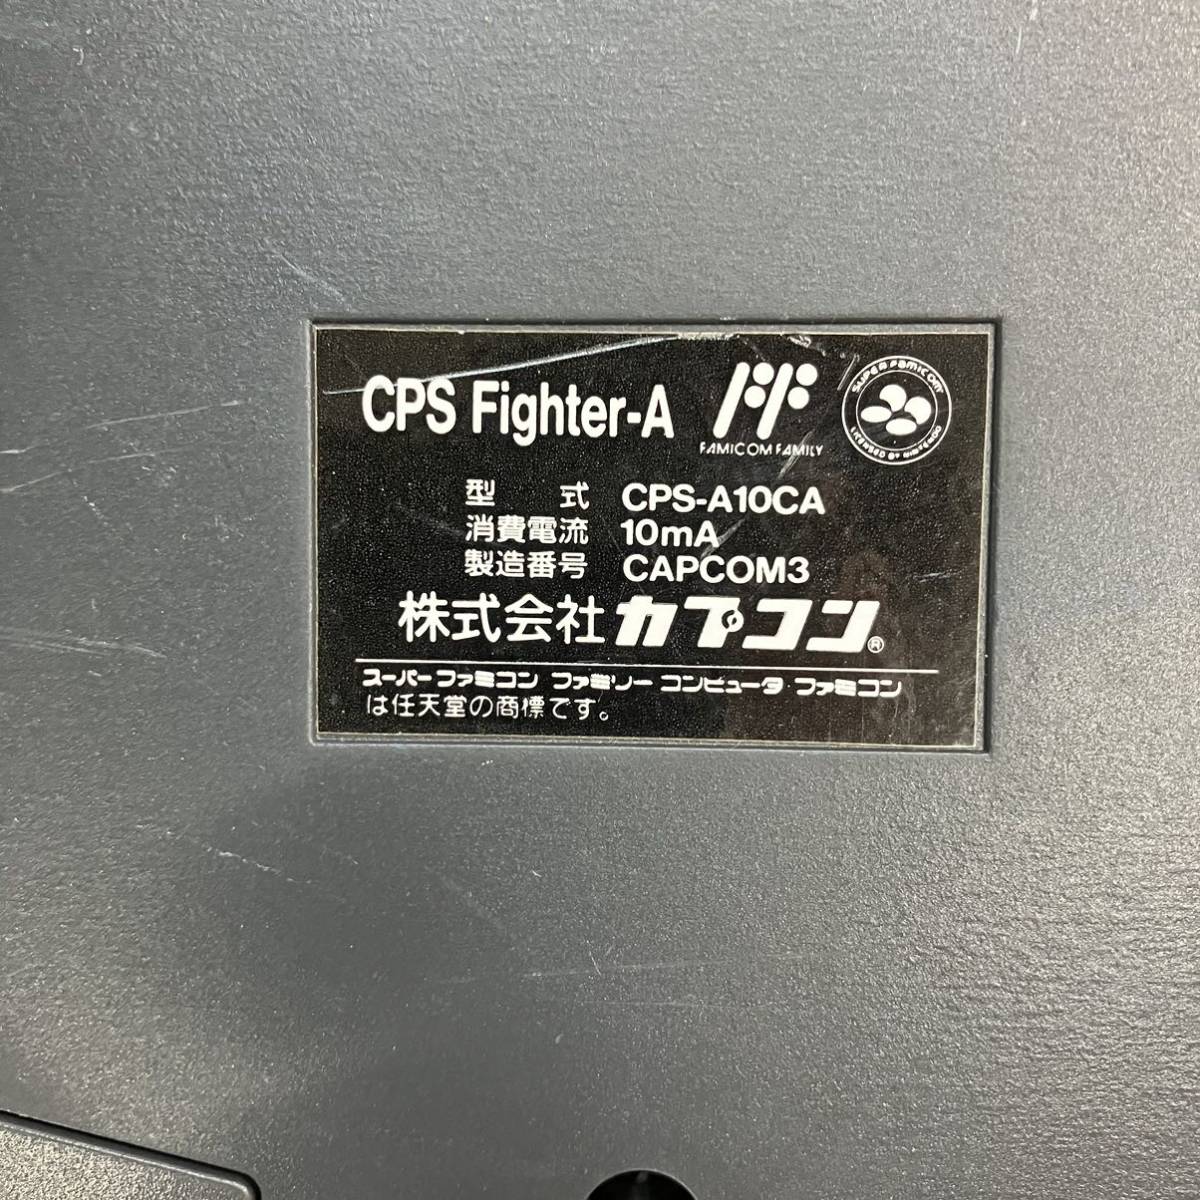 CAPCOM カプコン CPS Fighter-A CPS-A10CA スティックコントローラー ファミコン _画像7